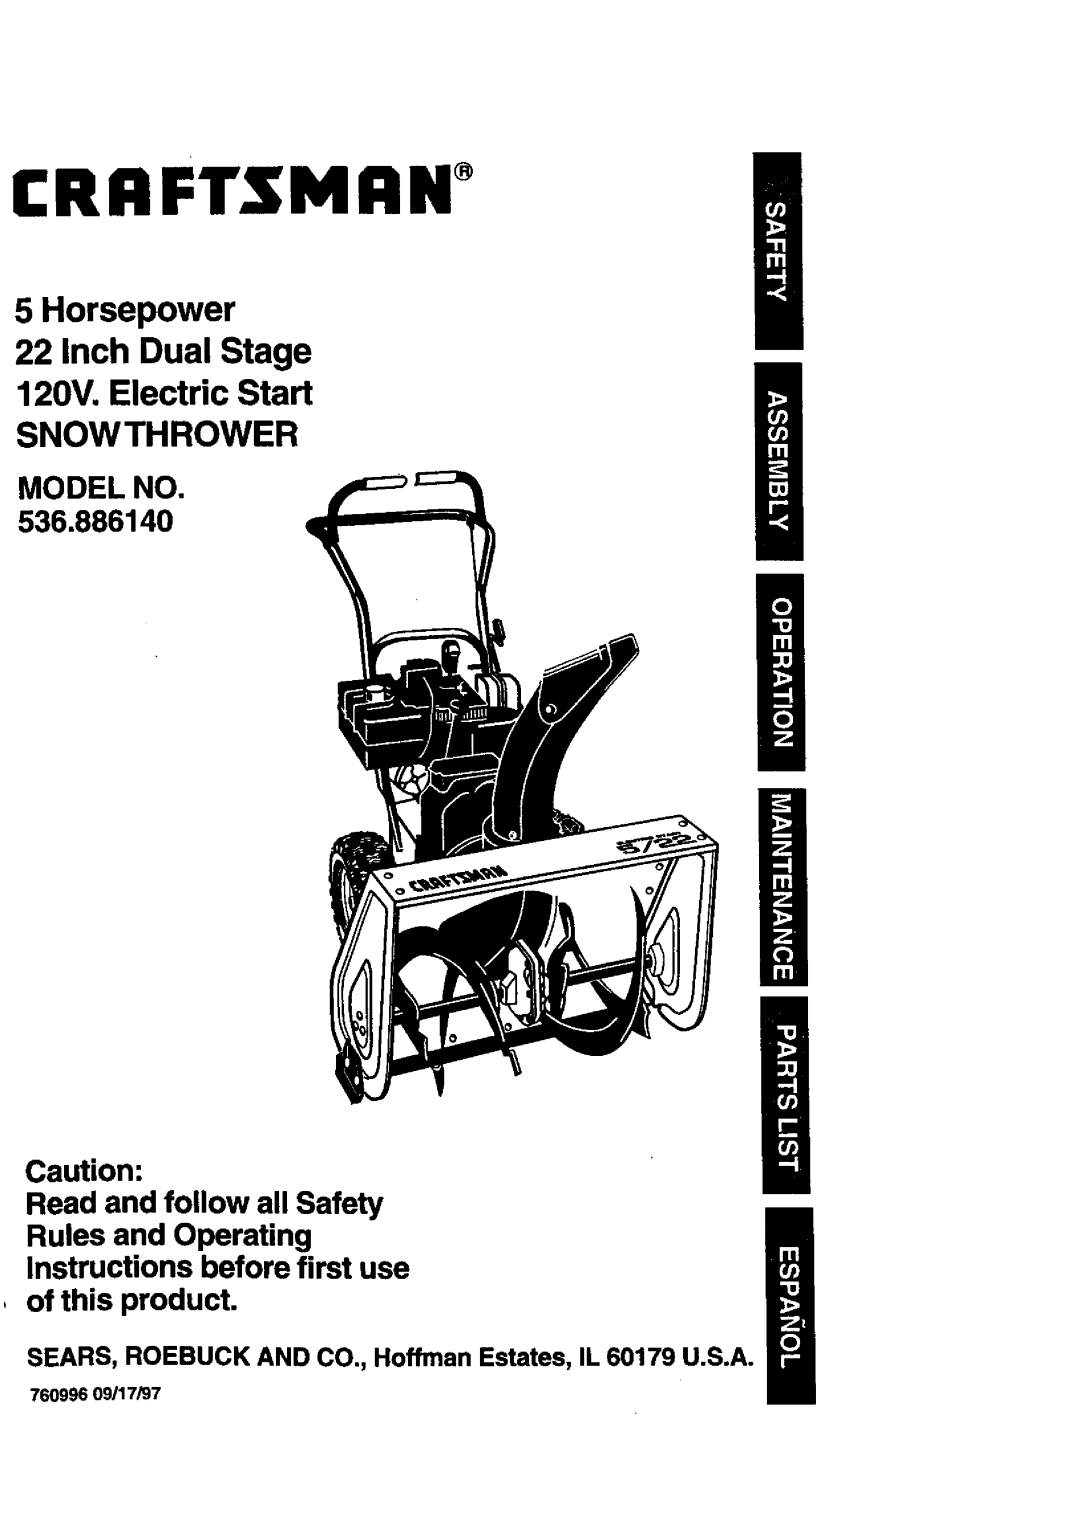 Craftsman 536.88614 manual Horsepower 22 Inch Dual Stage, 120V. Electric Start SNOWTHROWER, Model No, Crrftsmrw 